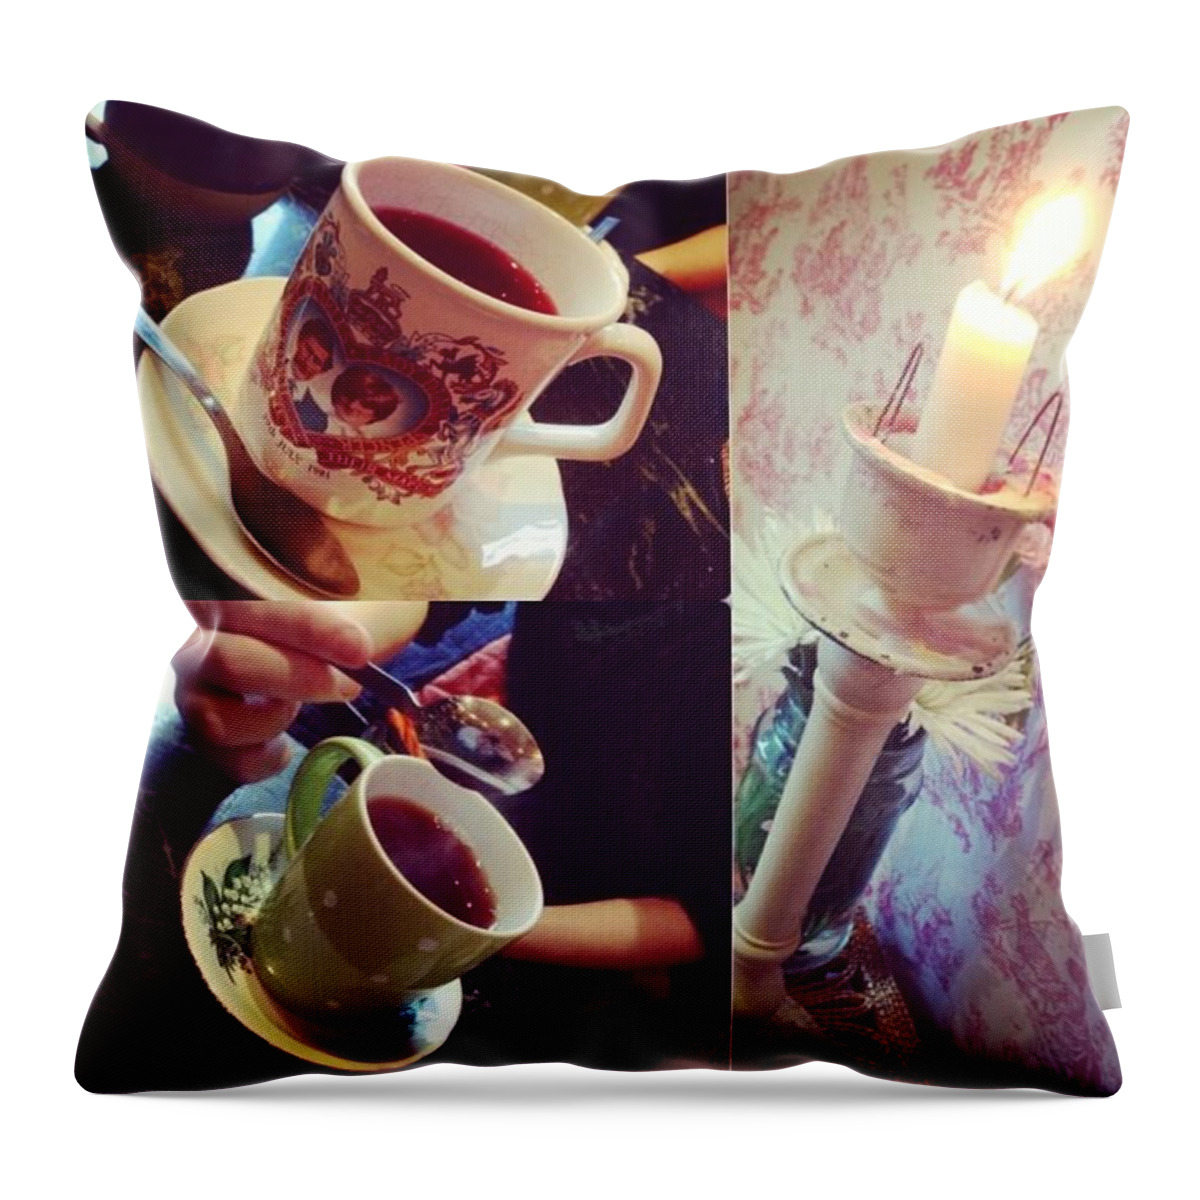 Family Throw Pillow featuring the photograph As A Thank You For C's Help We Thought by Michael Comerford